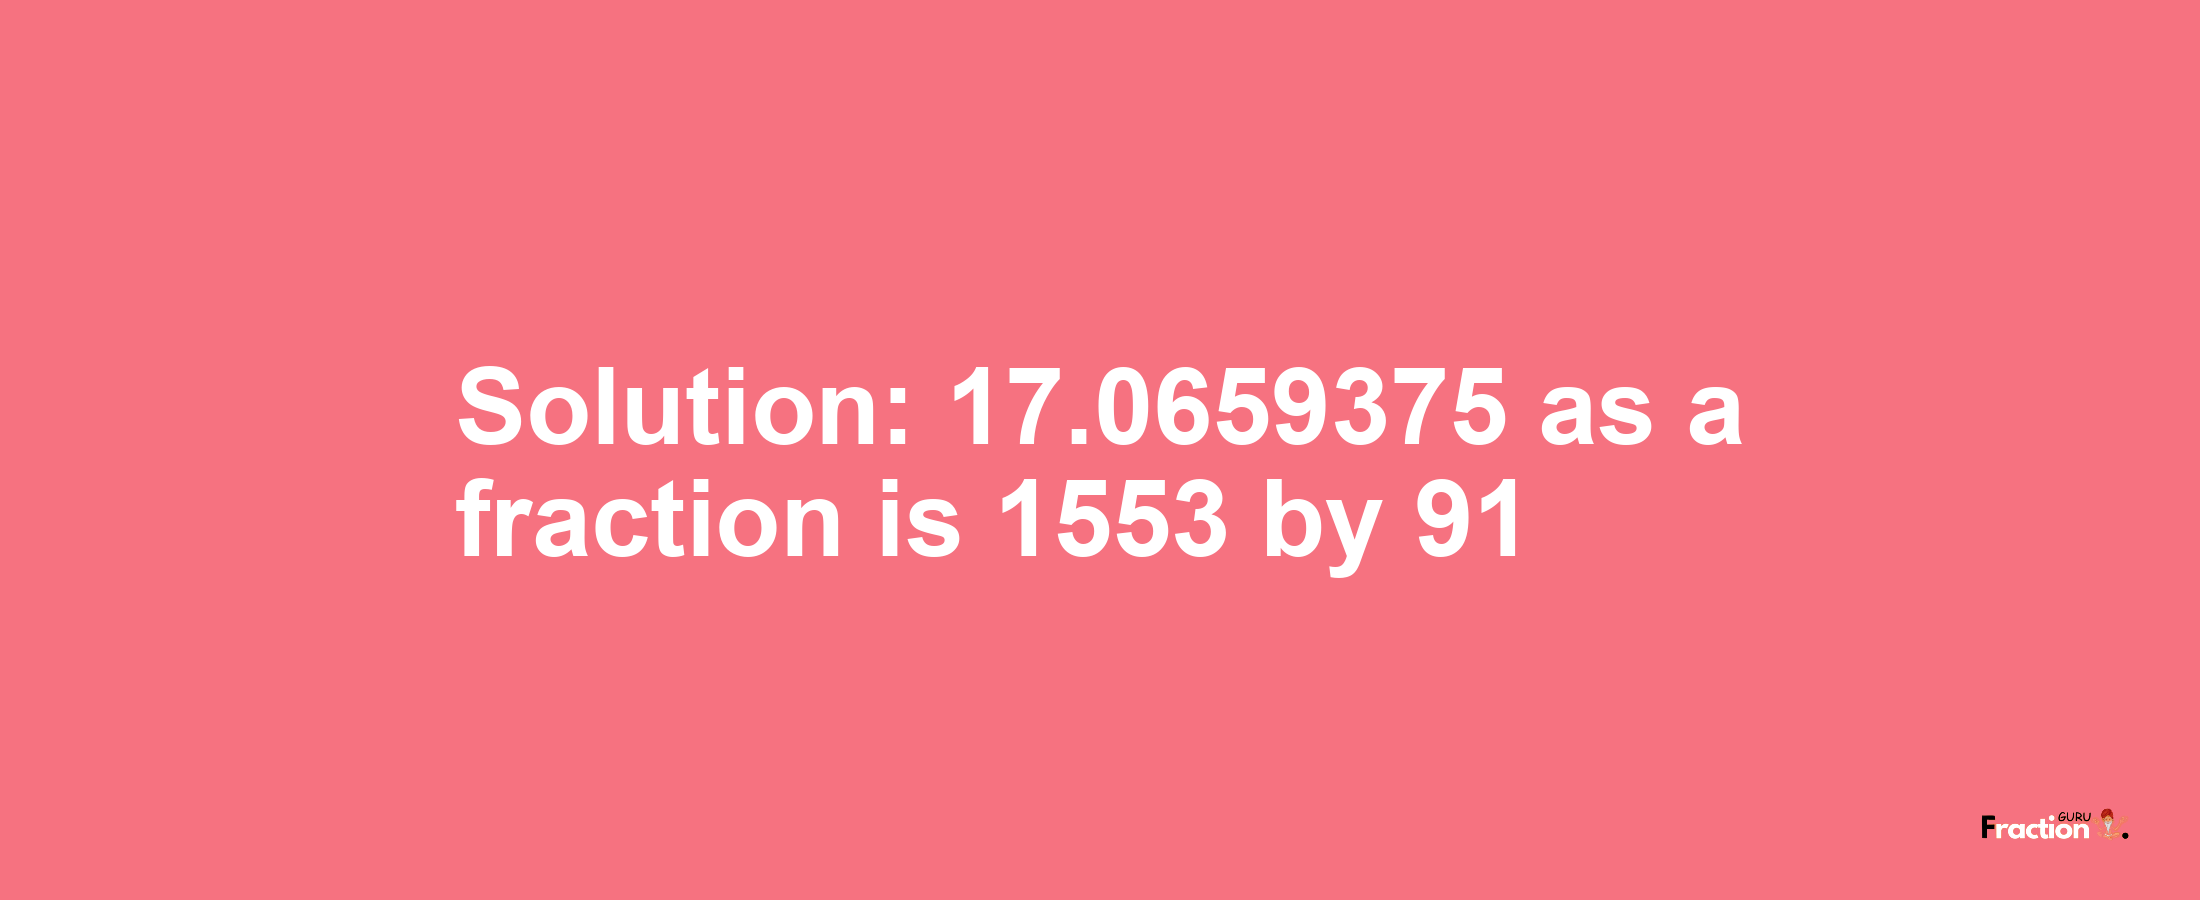 Solution:17.0659375 as a fraction is 1553/91